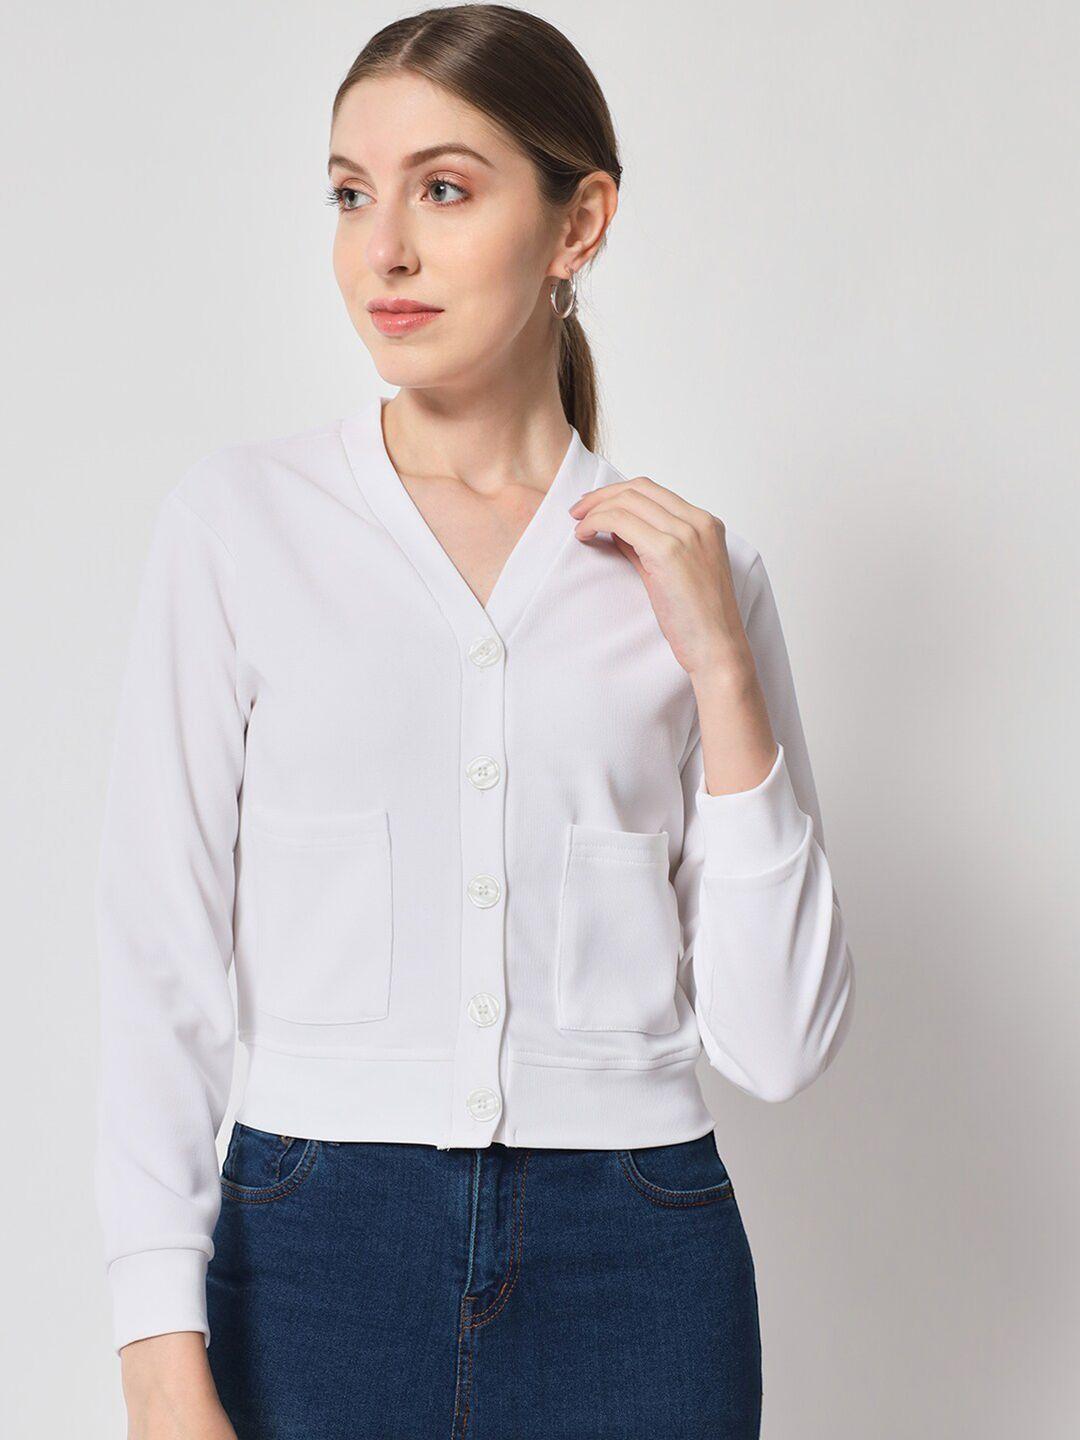 orchid hues shirt style top